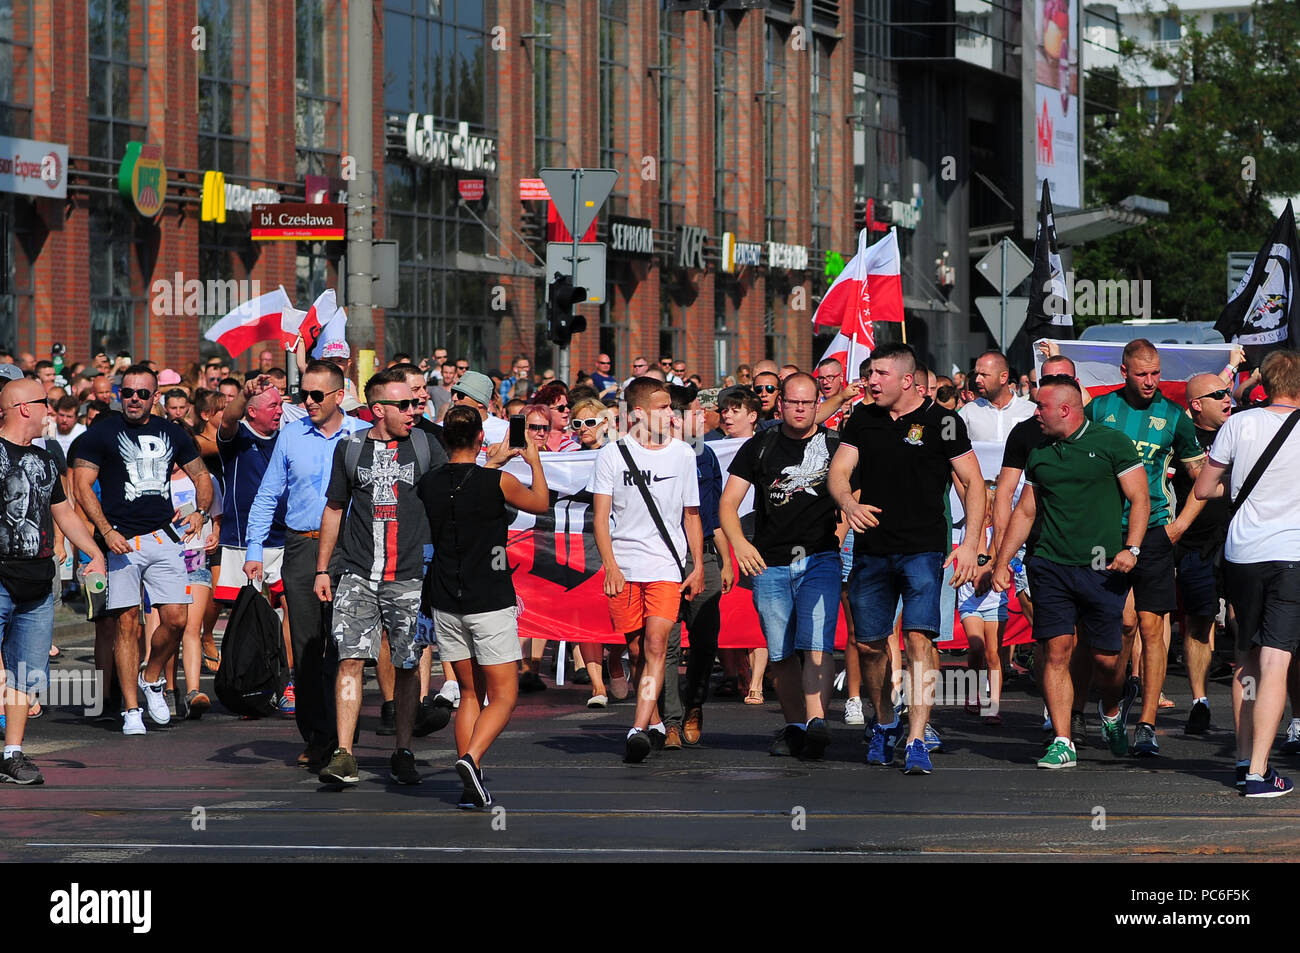 Wroclaw, Poland. August 1st, 2018. The people of Wroclaw, Poland march through the city on August 1, 2018 as they commemorate the 74nd anniversary of the Warsaw Uprising. The 1944 revolt saw thousands rise against the Nazi occupation in an effort to take back their city. Stock Photo